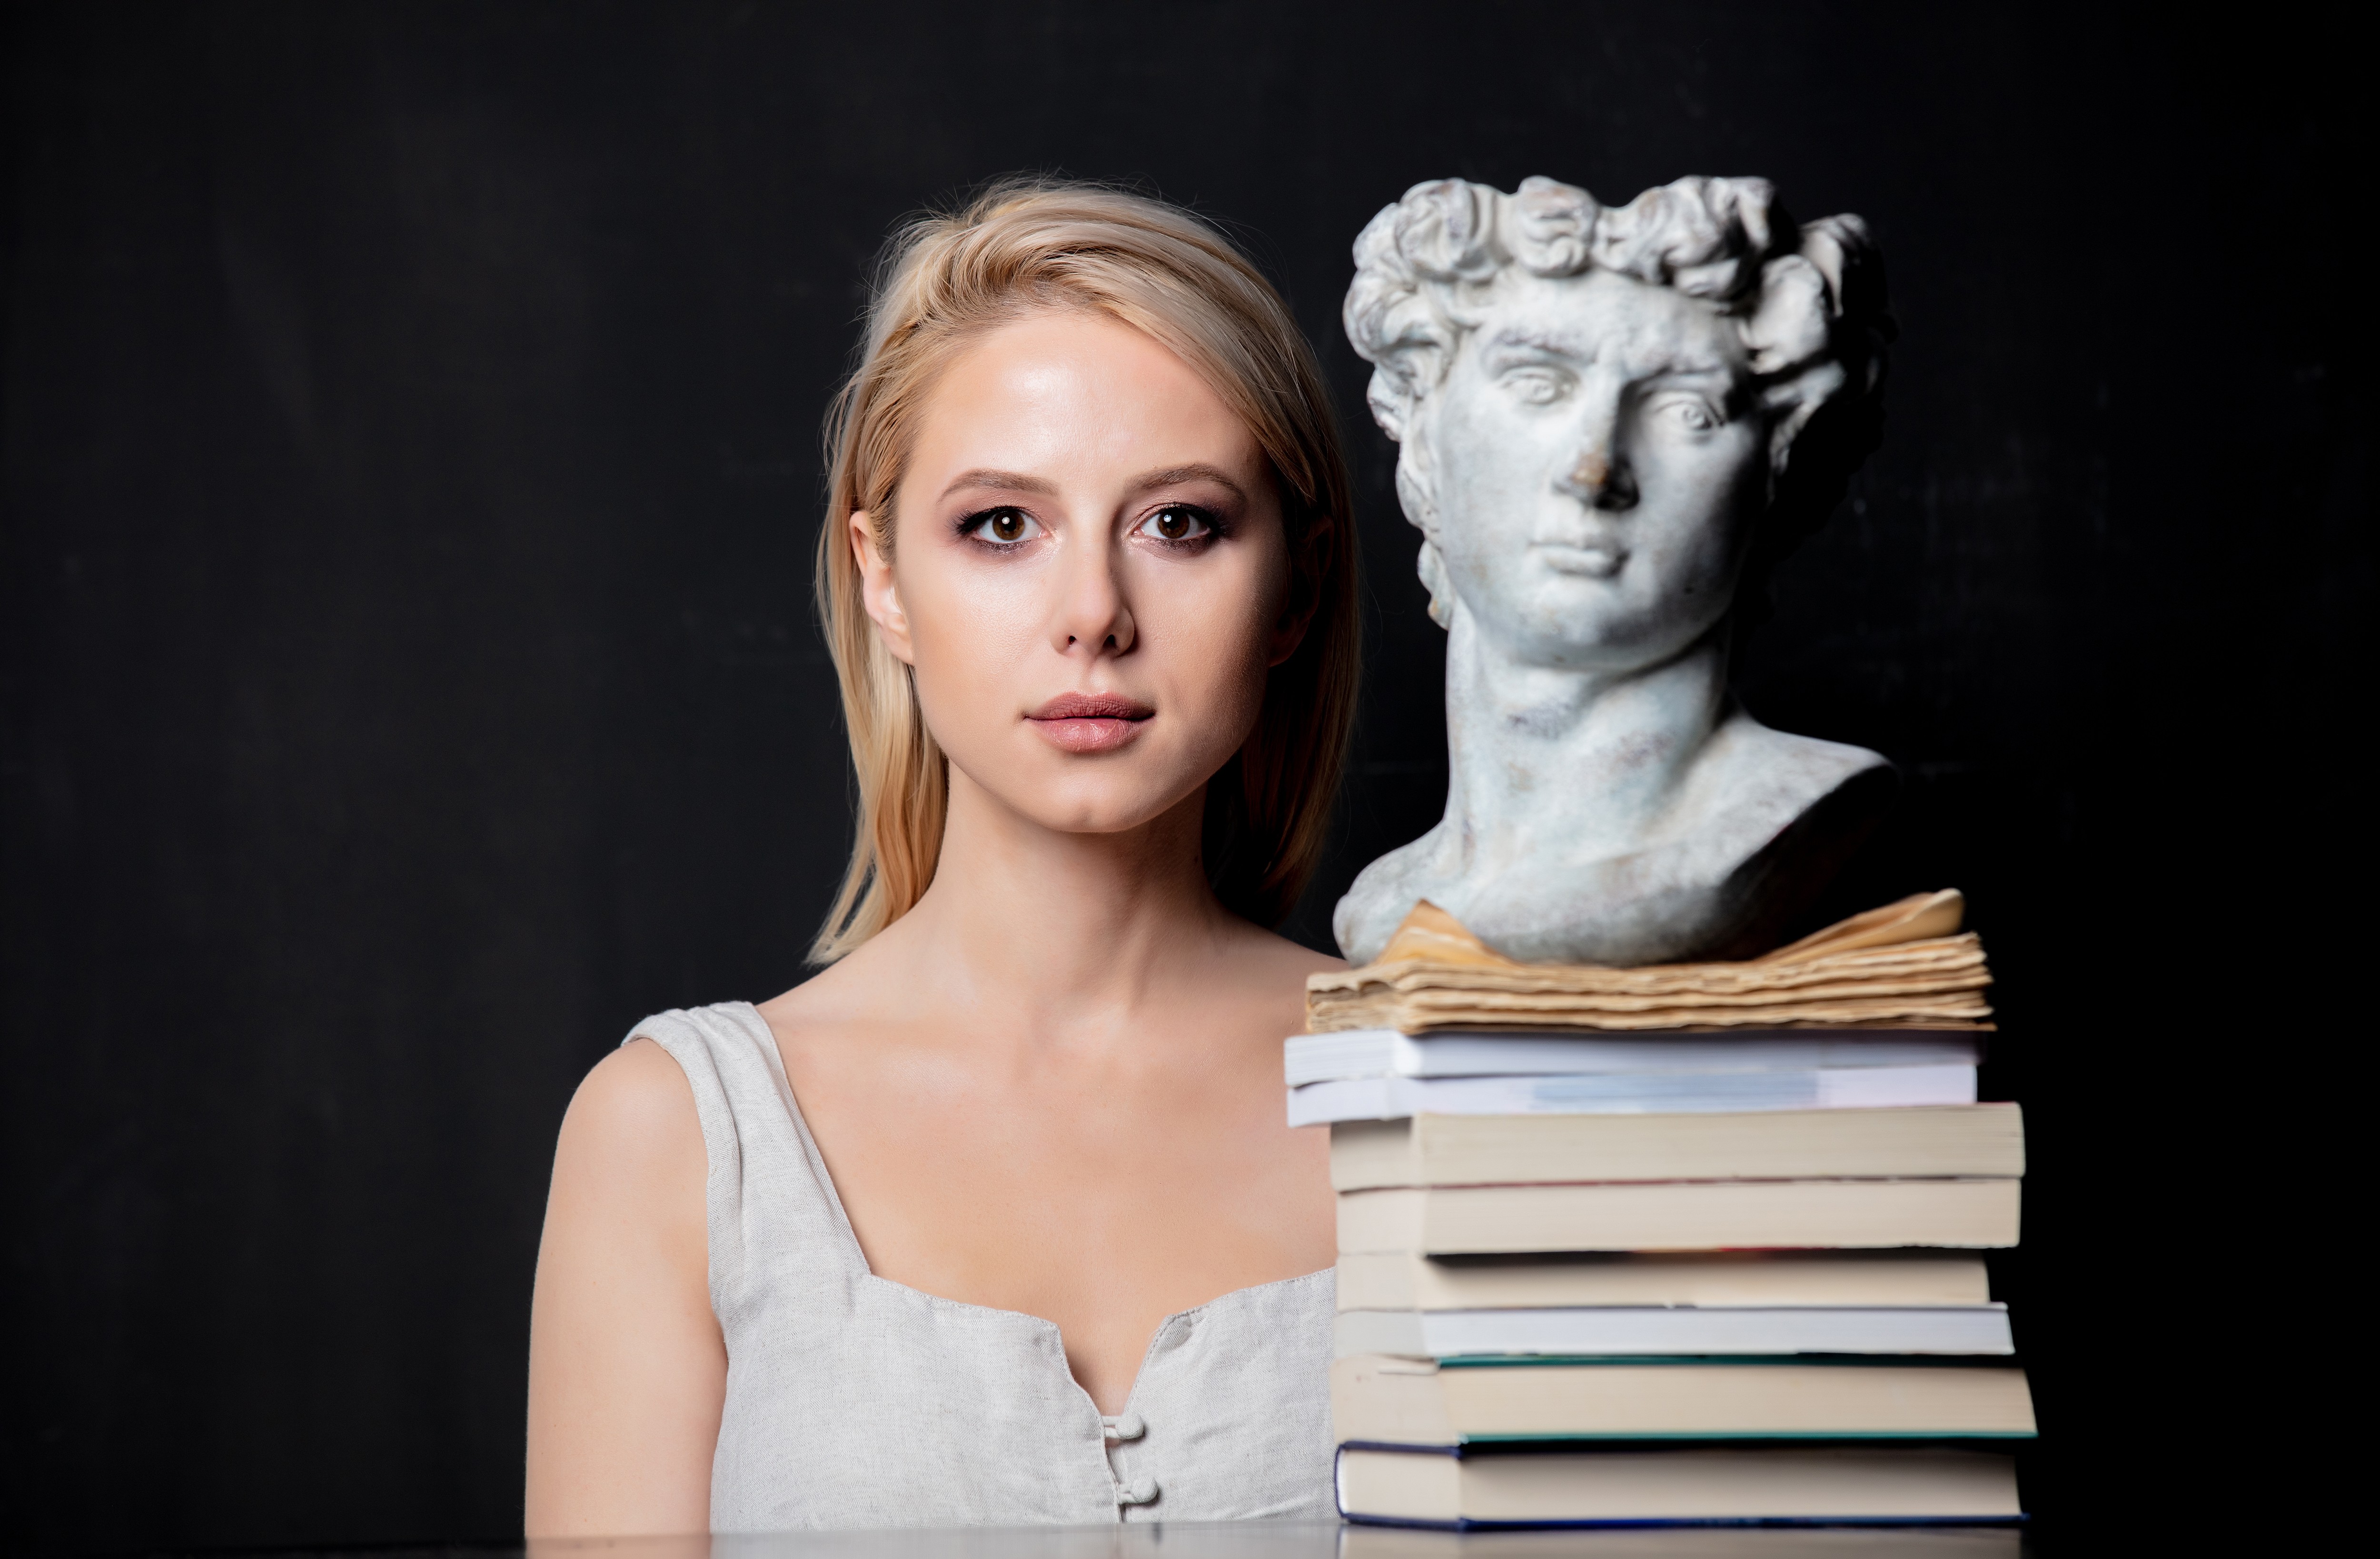 blonde next to an antique bust of a man on books